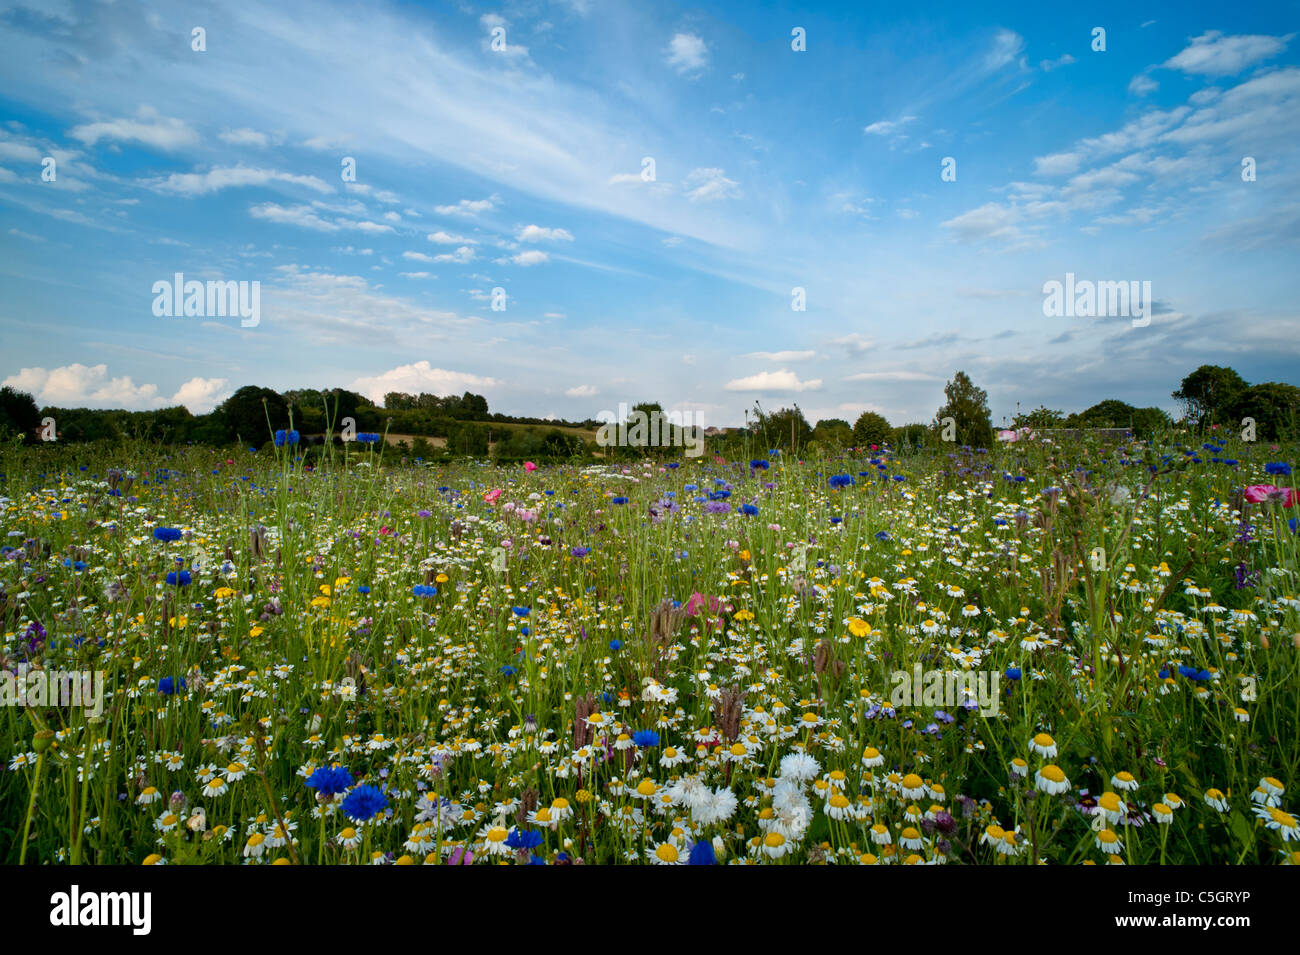 Wildflower meadow.  Cornflowers and daisies in a field full of wildflowers on an English Summer's day Stock Photo